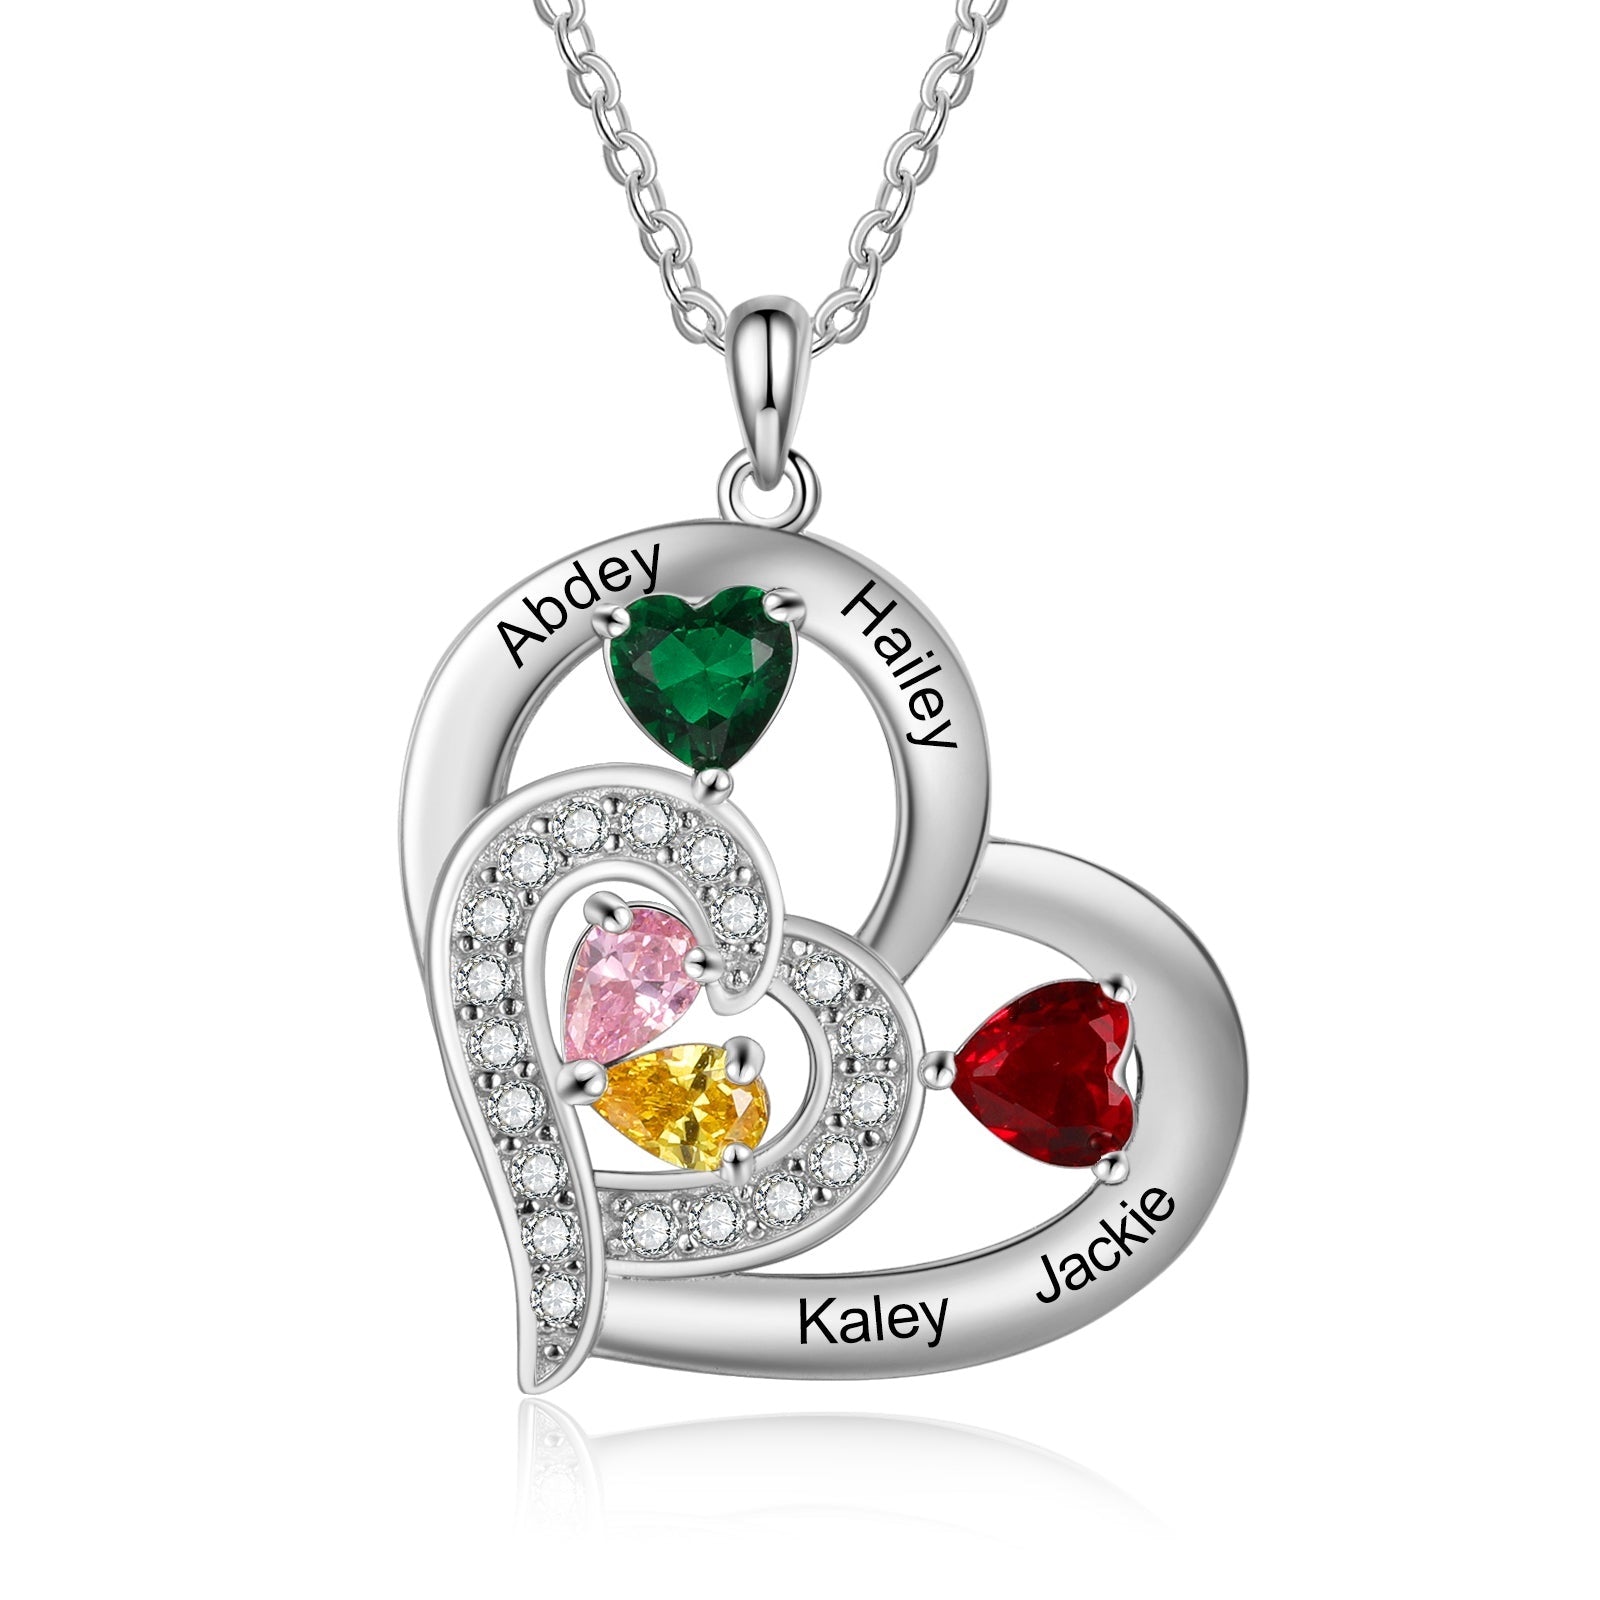 Personalized 1-6 Name Engraving Heart Pendant Classic Custom DIY Birthstone Necklace Gift